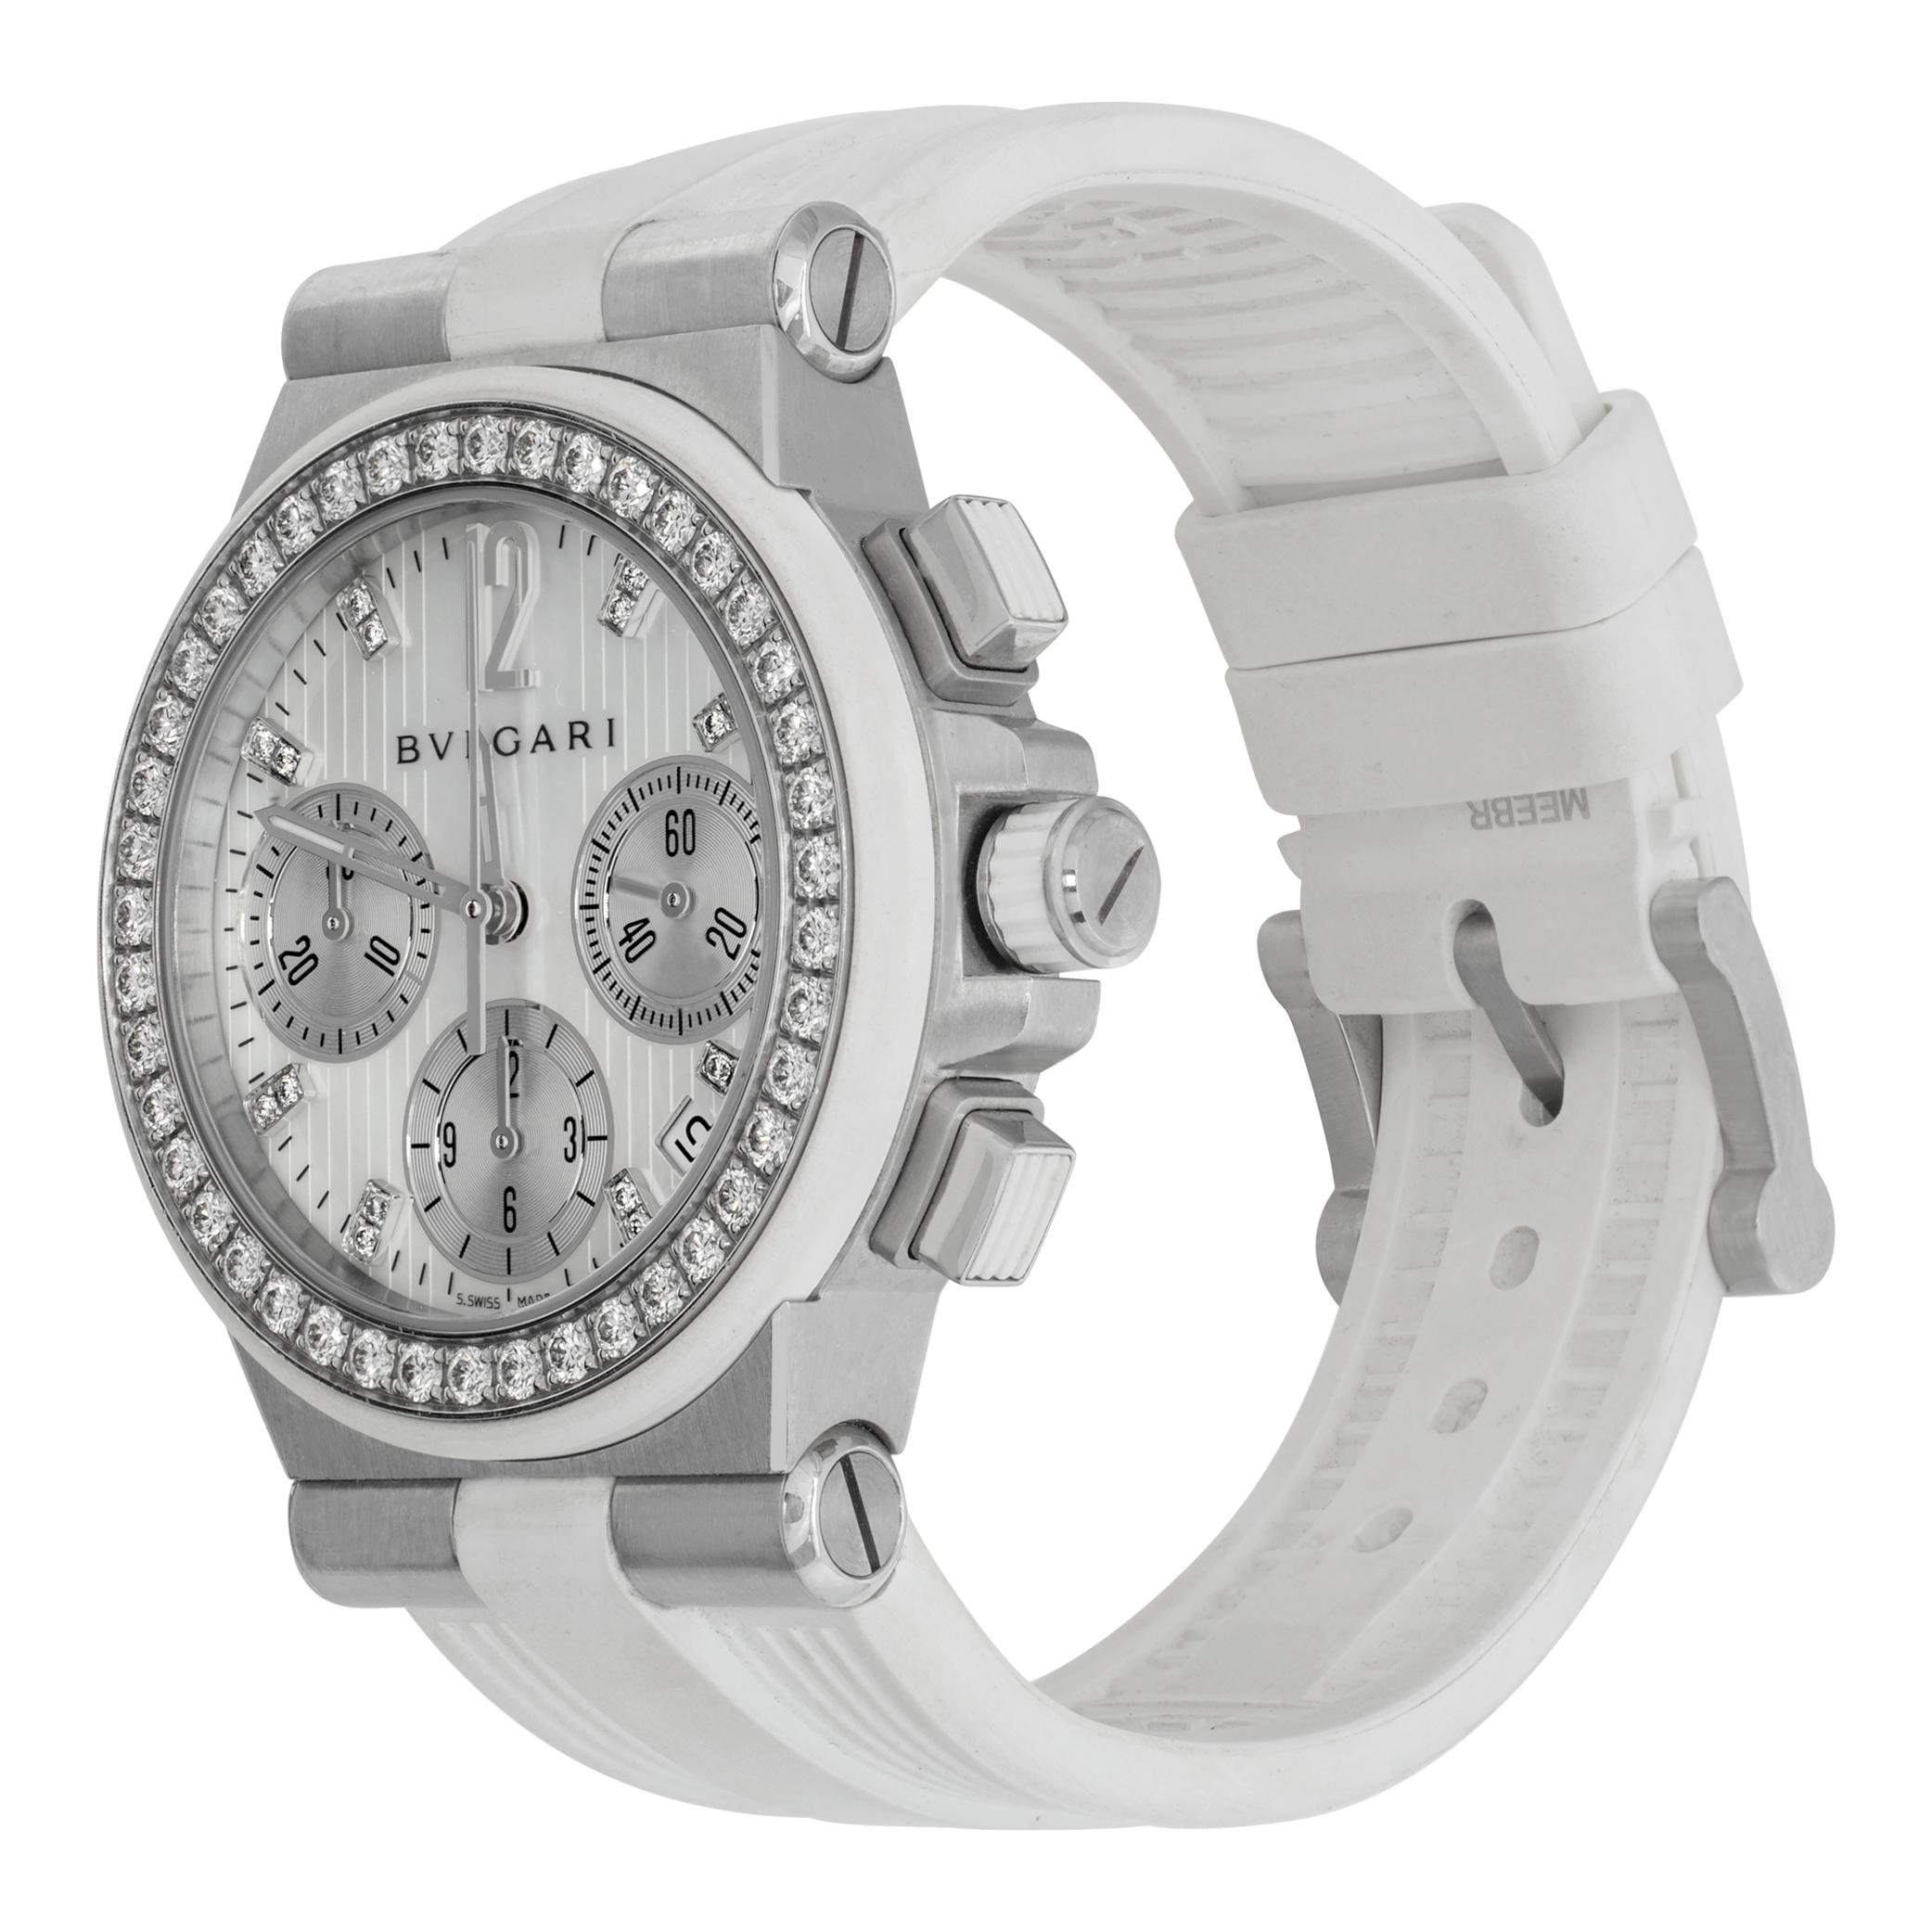 Bvlgari Diagono in stainless steel with diamond bezel & mother of pearl diamond dial on a white rubber strap. Auto w/ subseconds, date and chronograph. 35 mm case size. Ref DG 35 SV CH. Fine Pre-owned Bvlgari / Bulgari Watch.

 Certified preowned